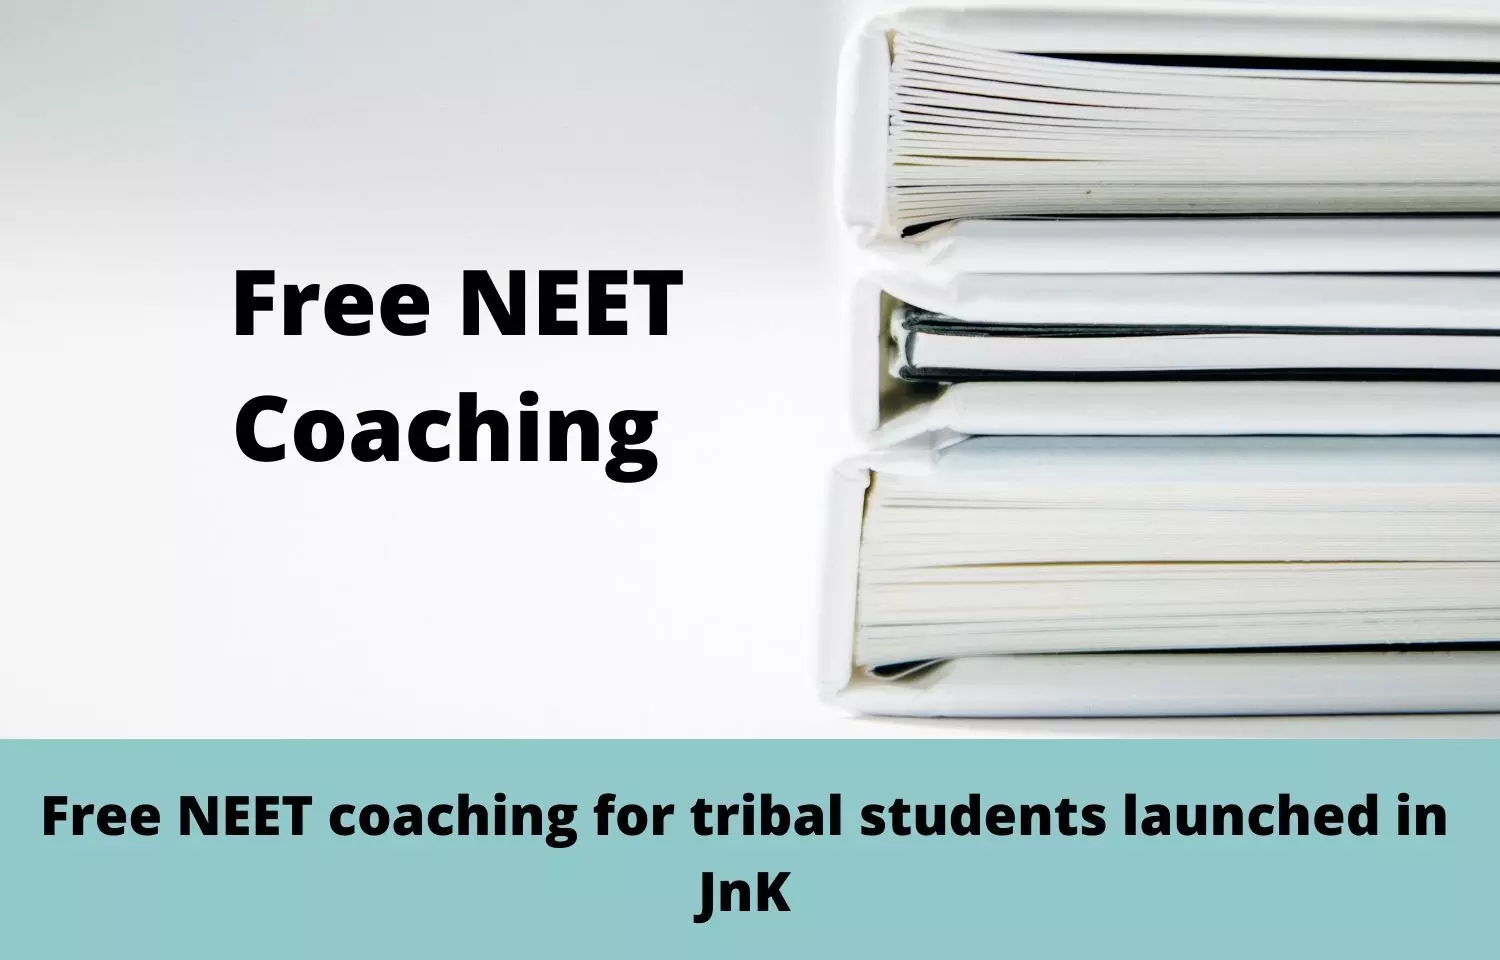 Free NEET coaching for tribal students launched in JnK